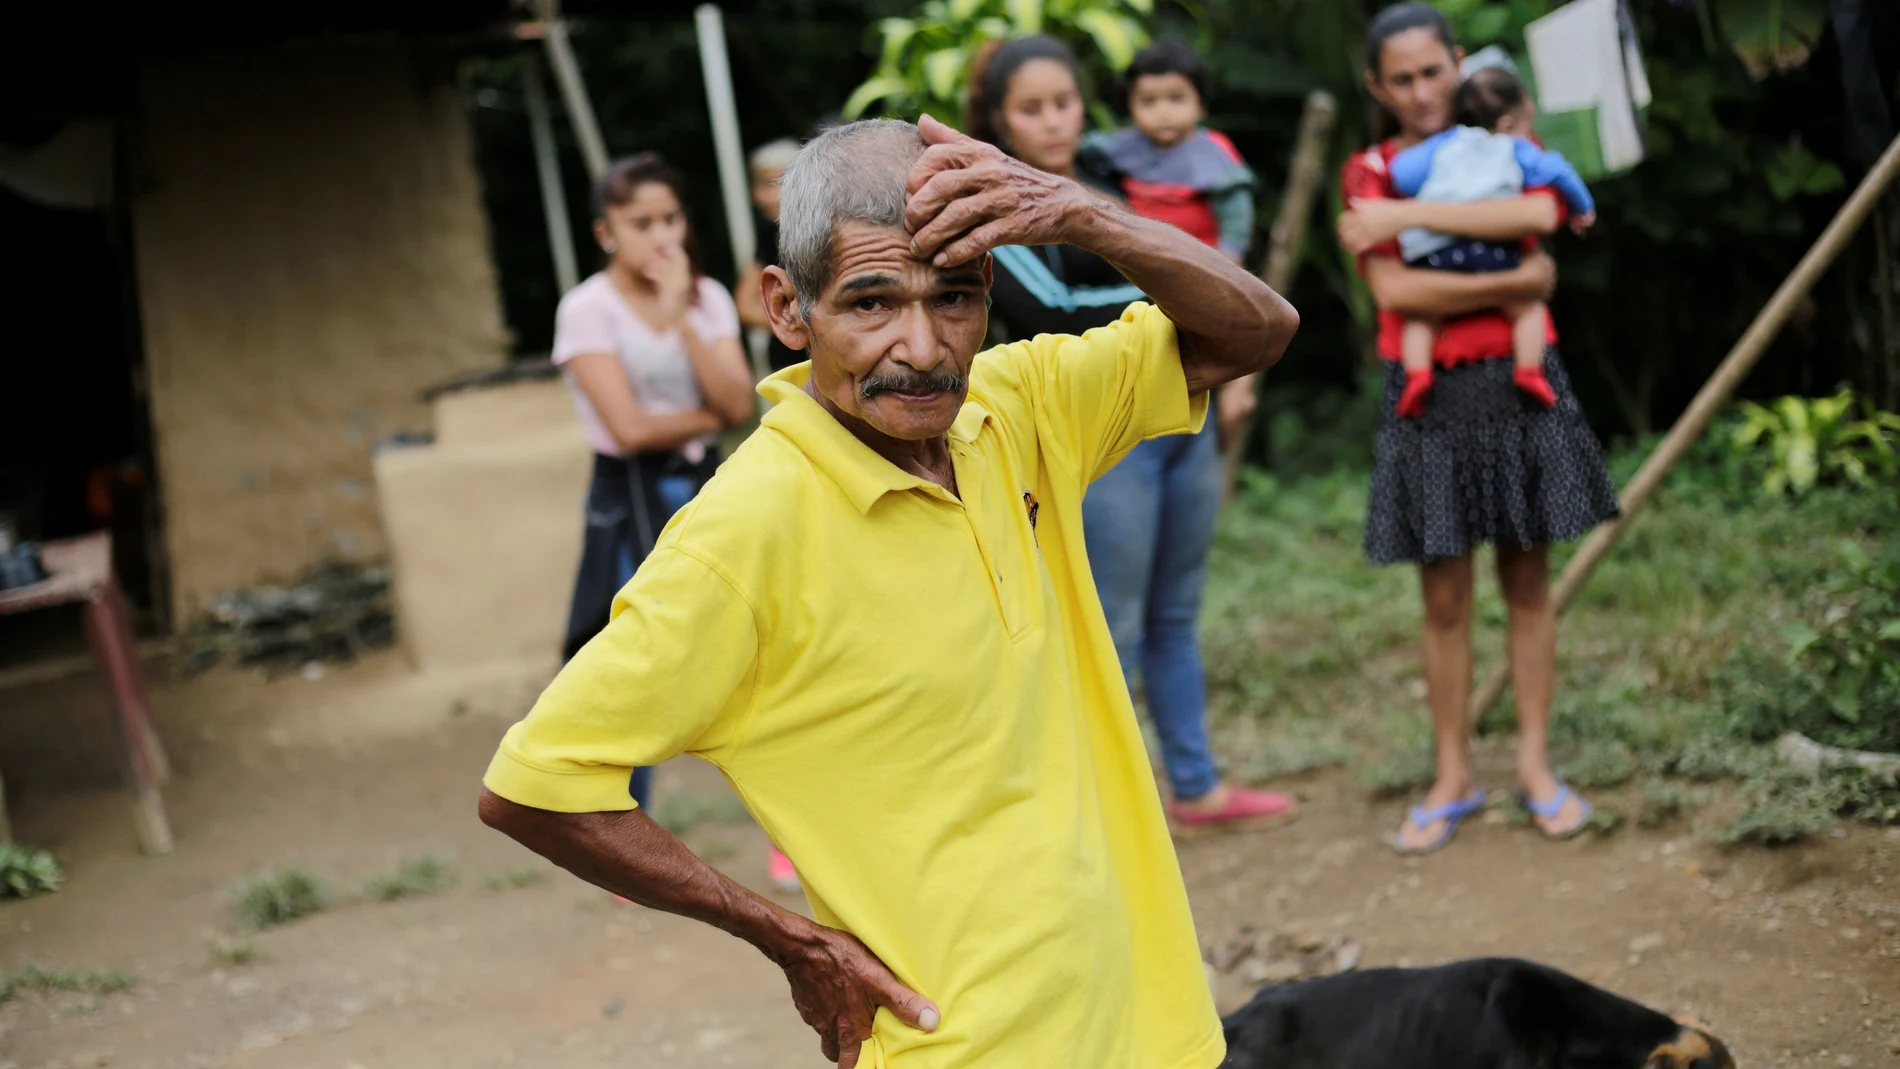 Felix Lara Rodriguez, father of late Honduran migrant Felix Enrique Lara, who died after falling from a trailer and getting trapped under its wheels while taking part in a migrant caravan towards the U.S., gestures at his home in San Antonio del Peru, Honduras October 2, 2020. REUTERS/Jorge Cabrera